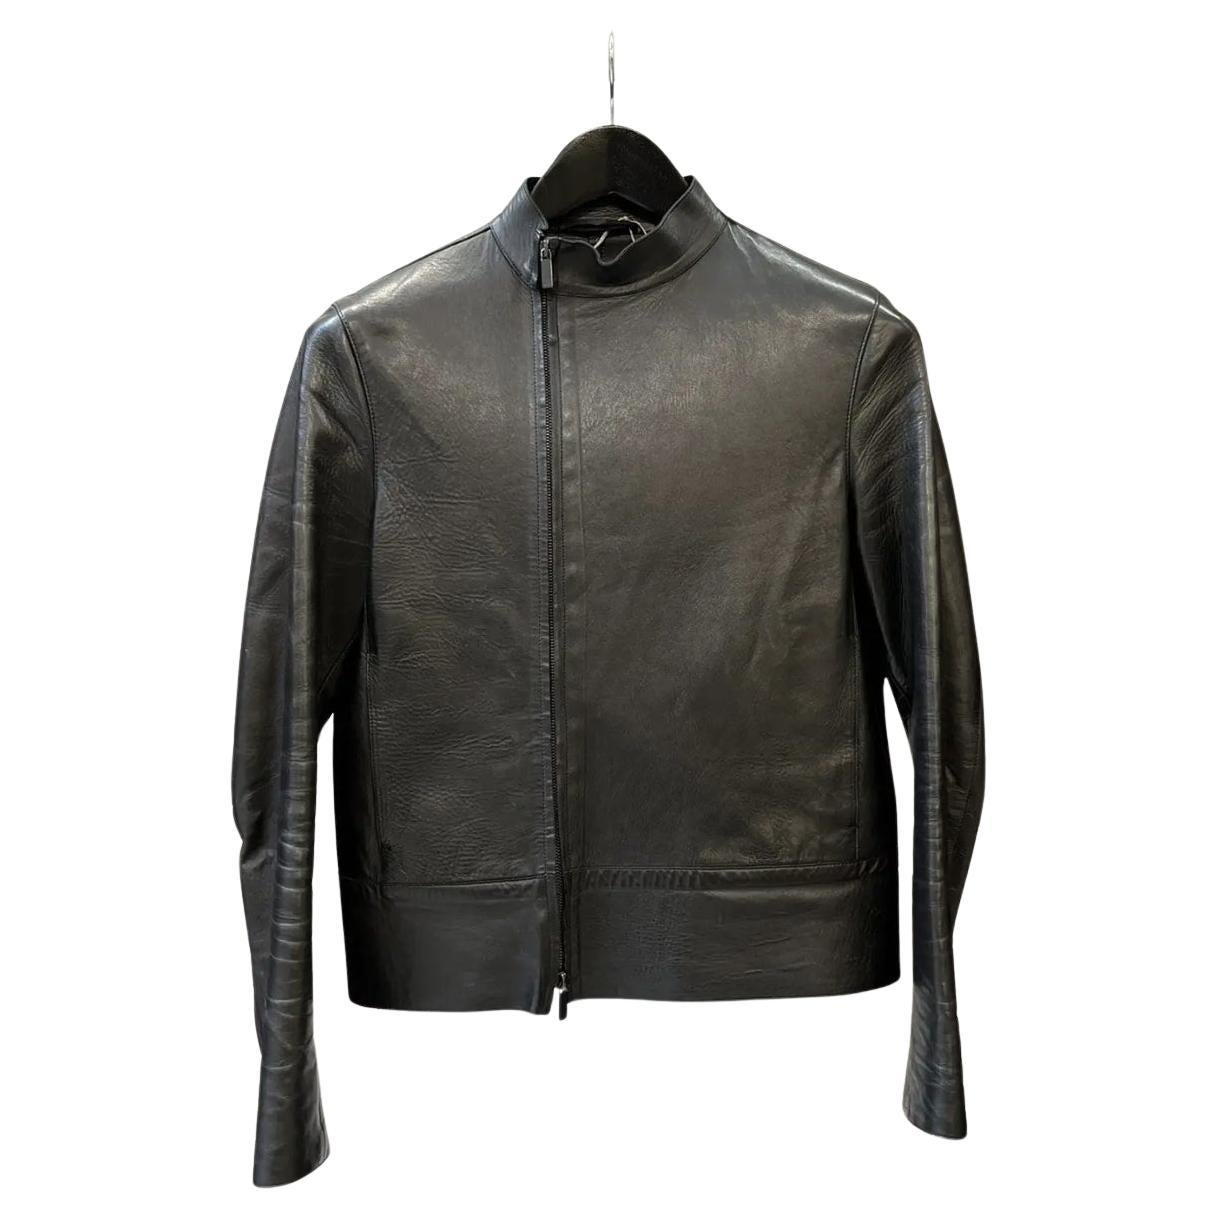 Gucci Tom Ford for Gucci FW 1999 Leather Zip Moto Jacket en vente